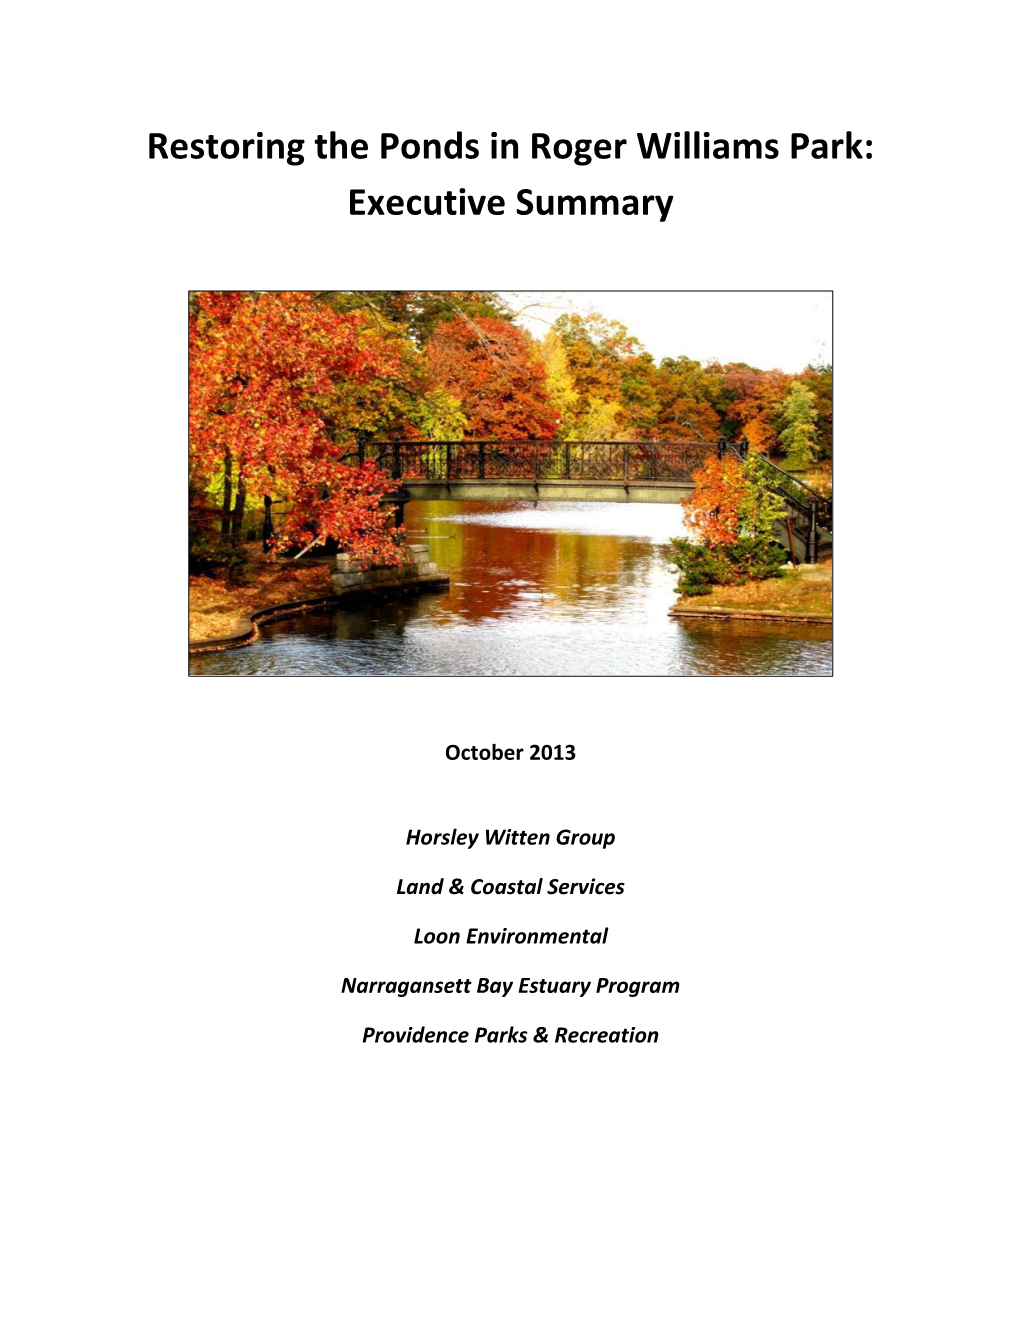 Restoring the Ponds in Roger Williams Park: Executive Summary